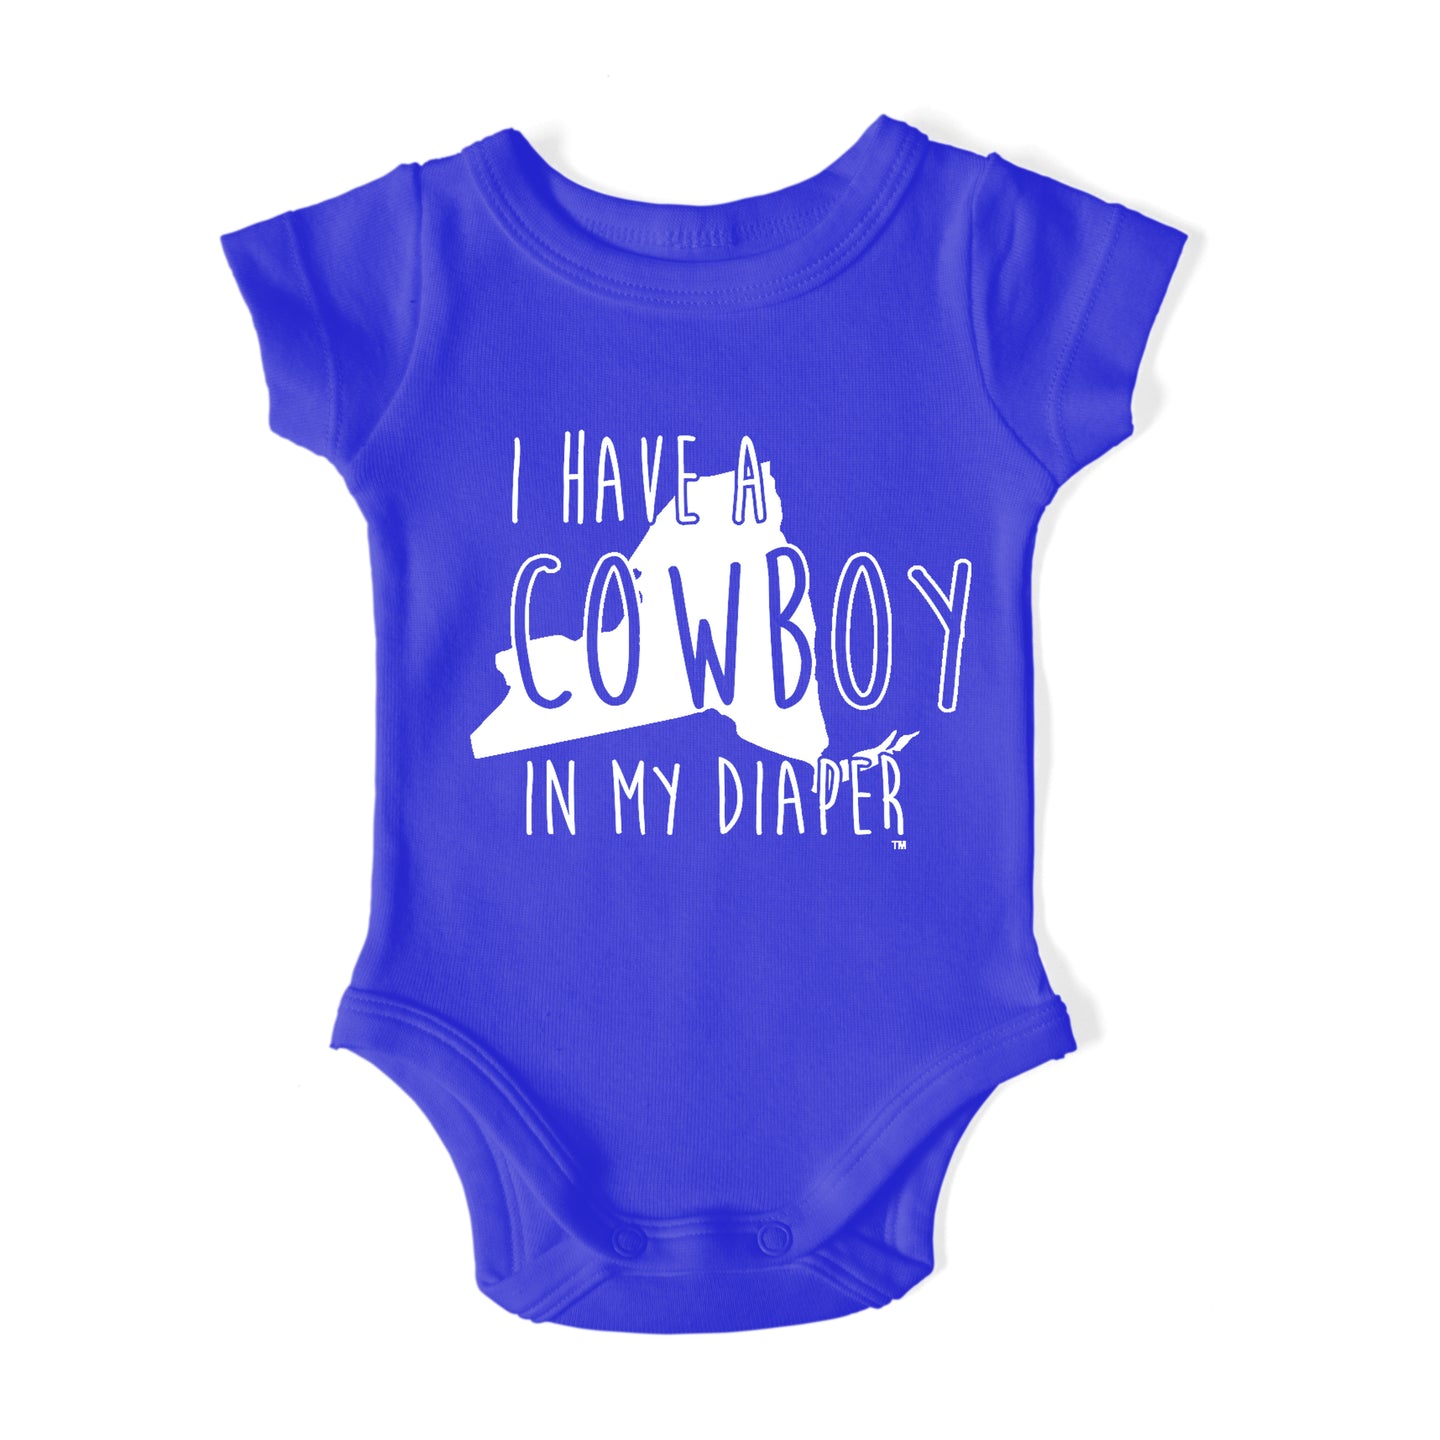 I HAVE A COWBOY IN MY DIAPER Baby One Piece